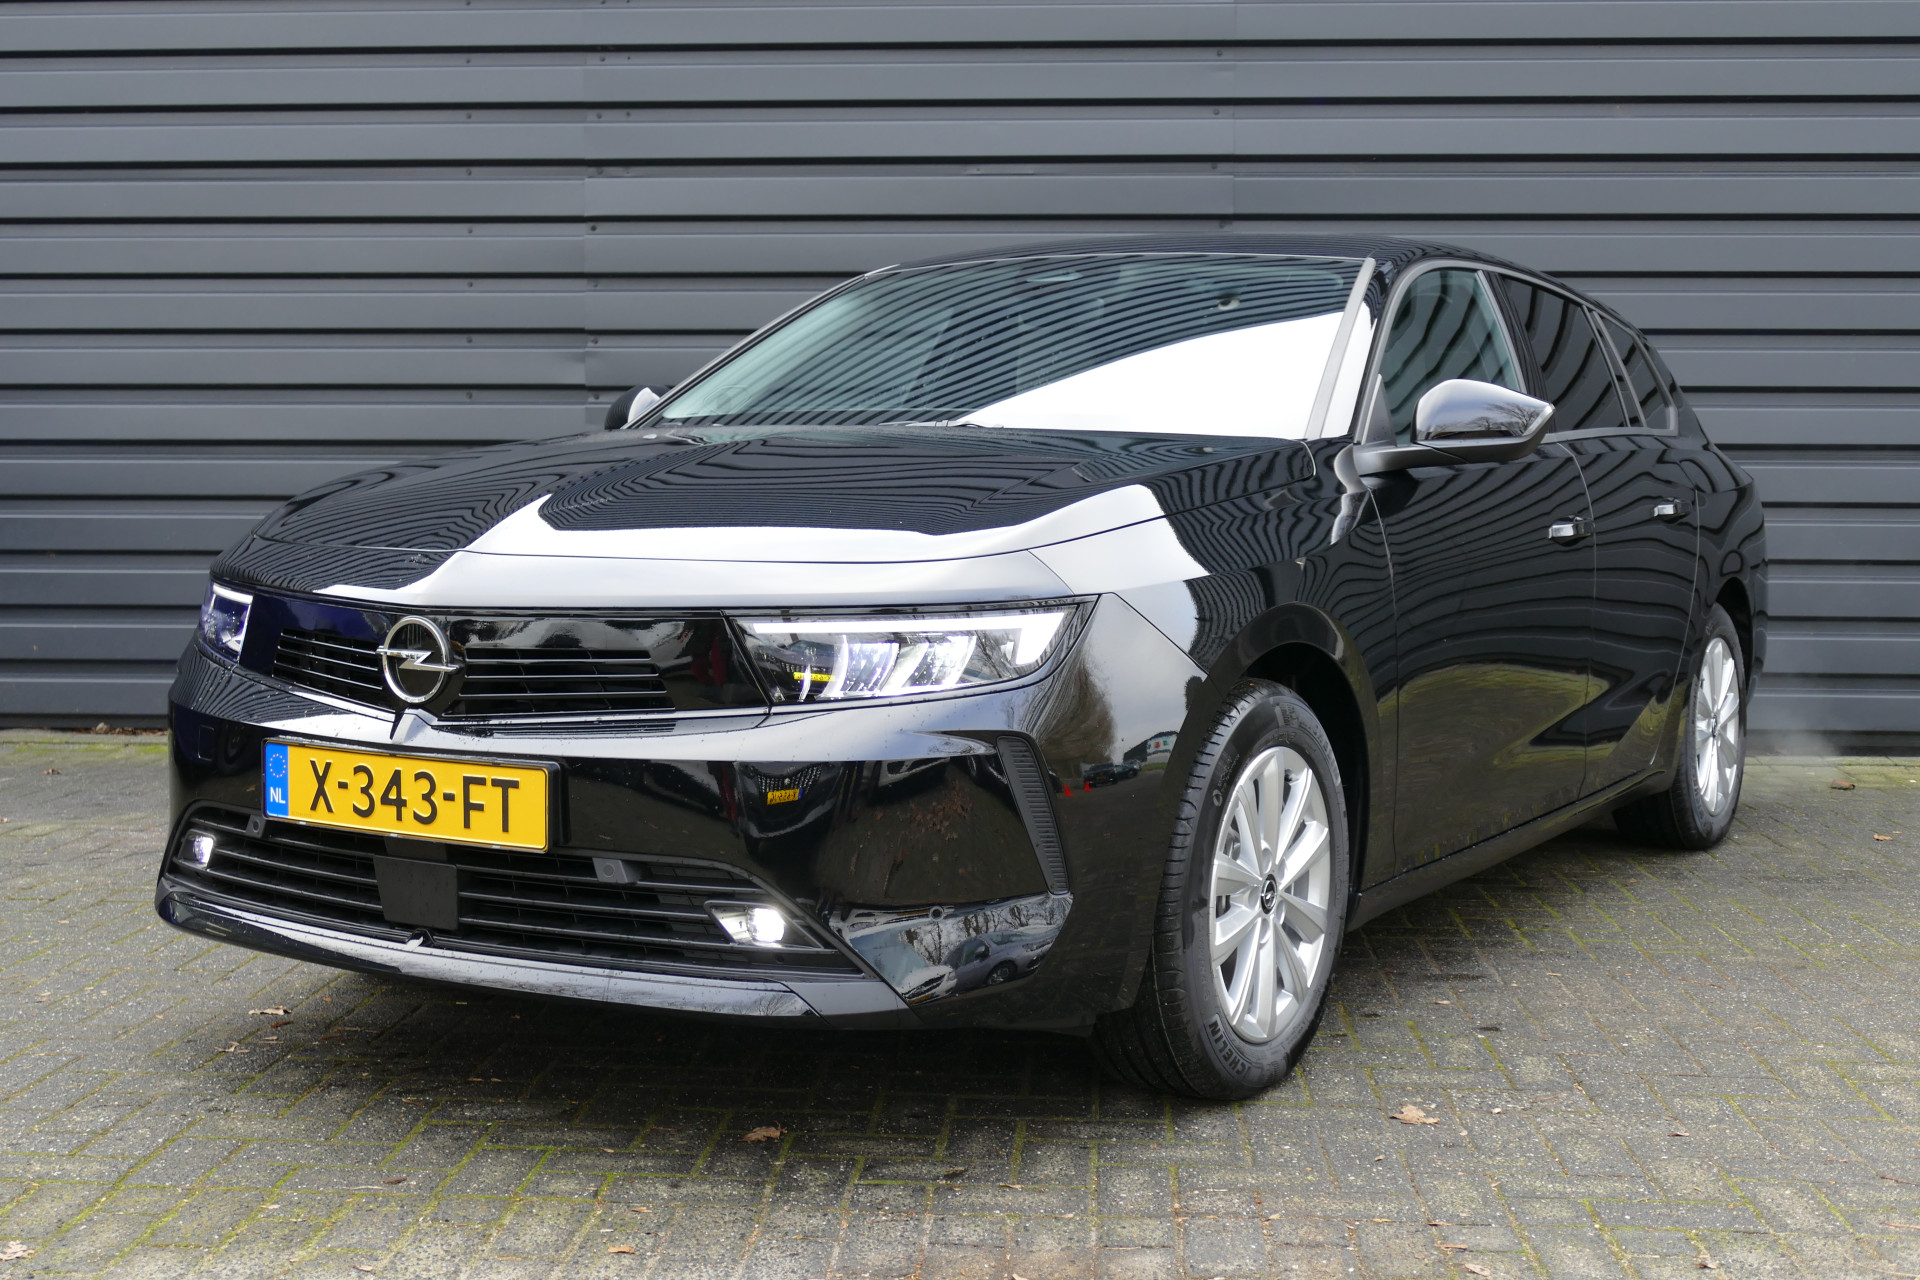 Opel Astra Sports Tourer 1.2 TURBO 110PK EDITION / NAVI / LED / CLIMA / PDC V+A / 16'' LMV / BLUETOOTH / CRUISECONTROL / VOORRAAD / DIRECT